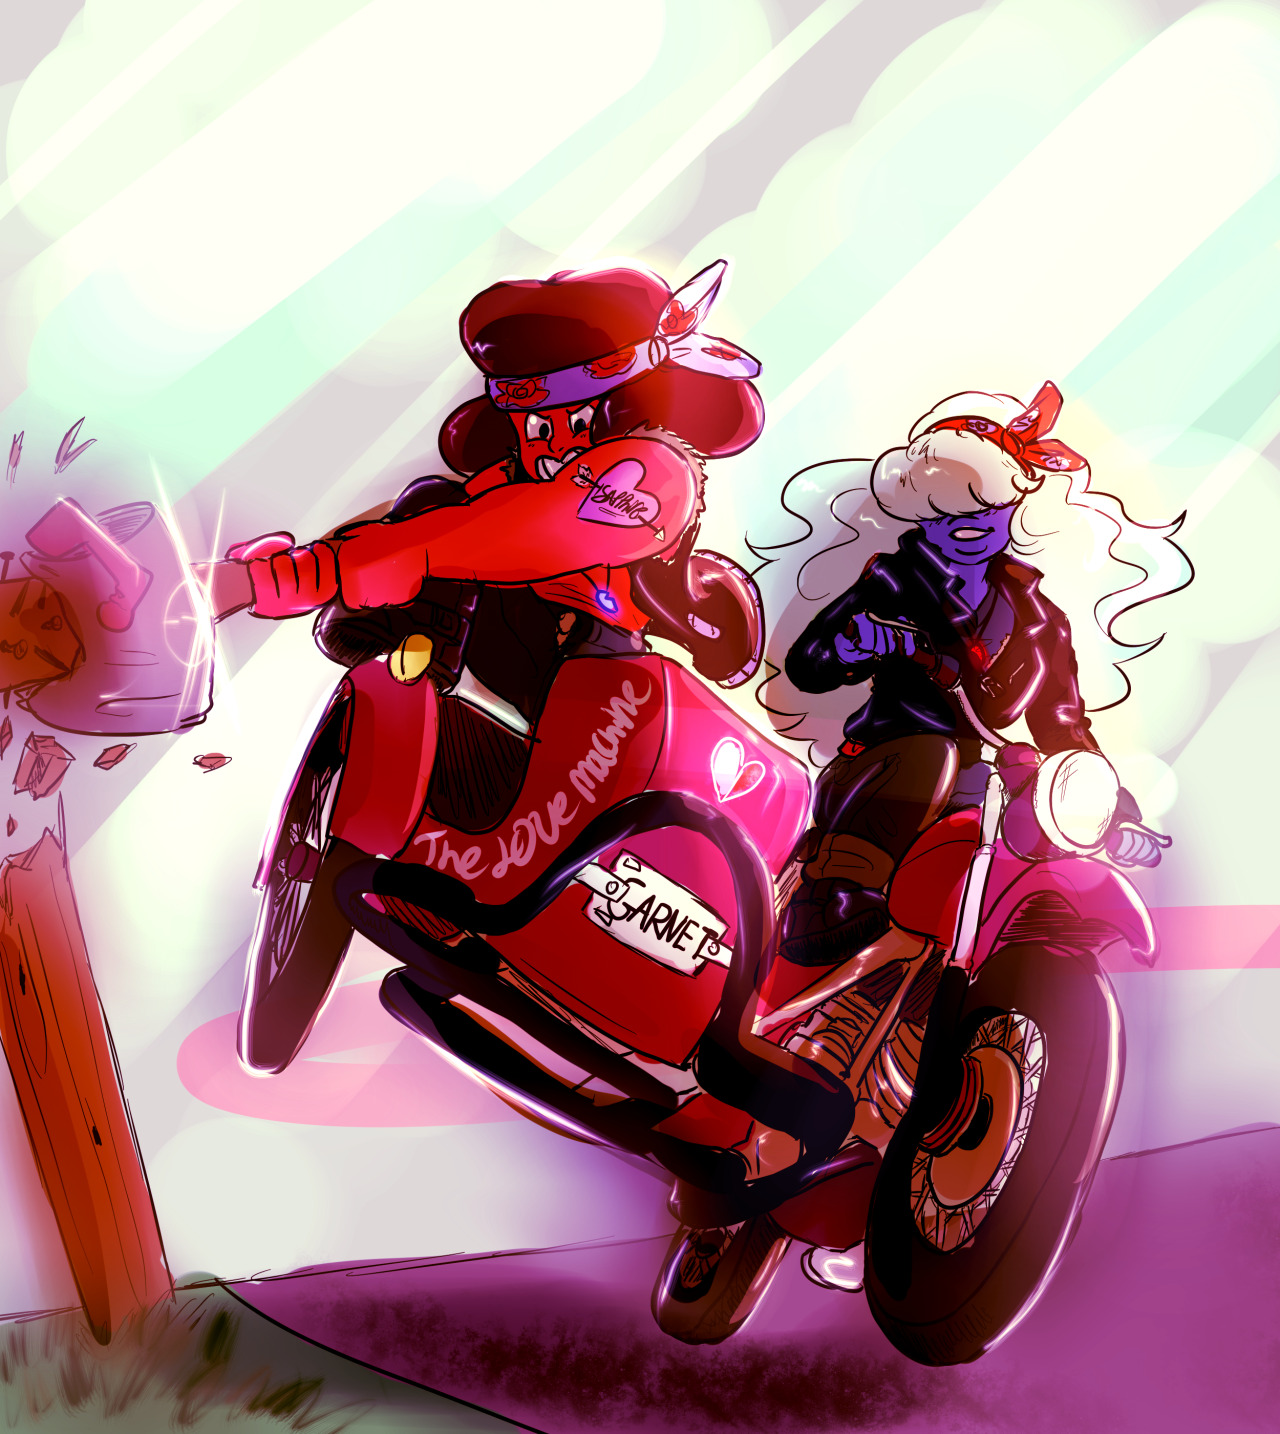 I have 0% self-control when it comes to cute Ruby and Sapphire stuff and I couldn’t